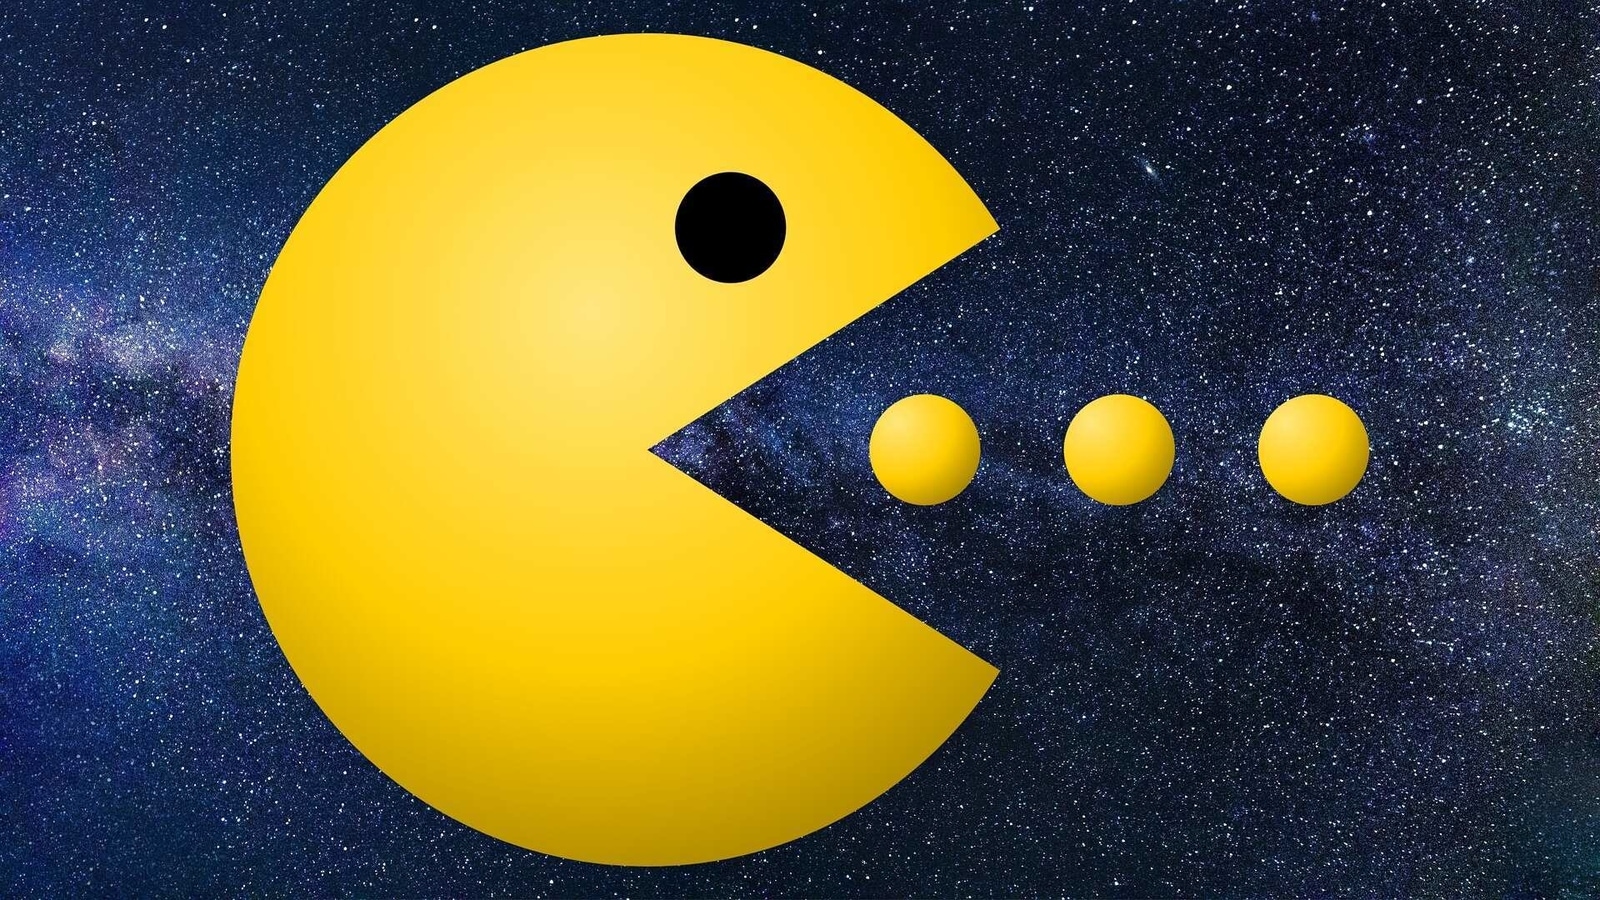 when did pac man come out